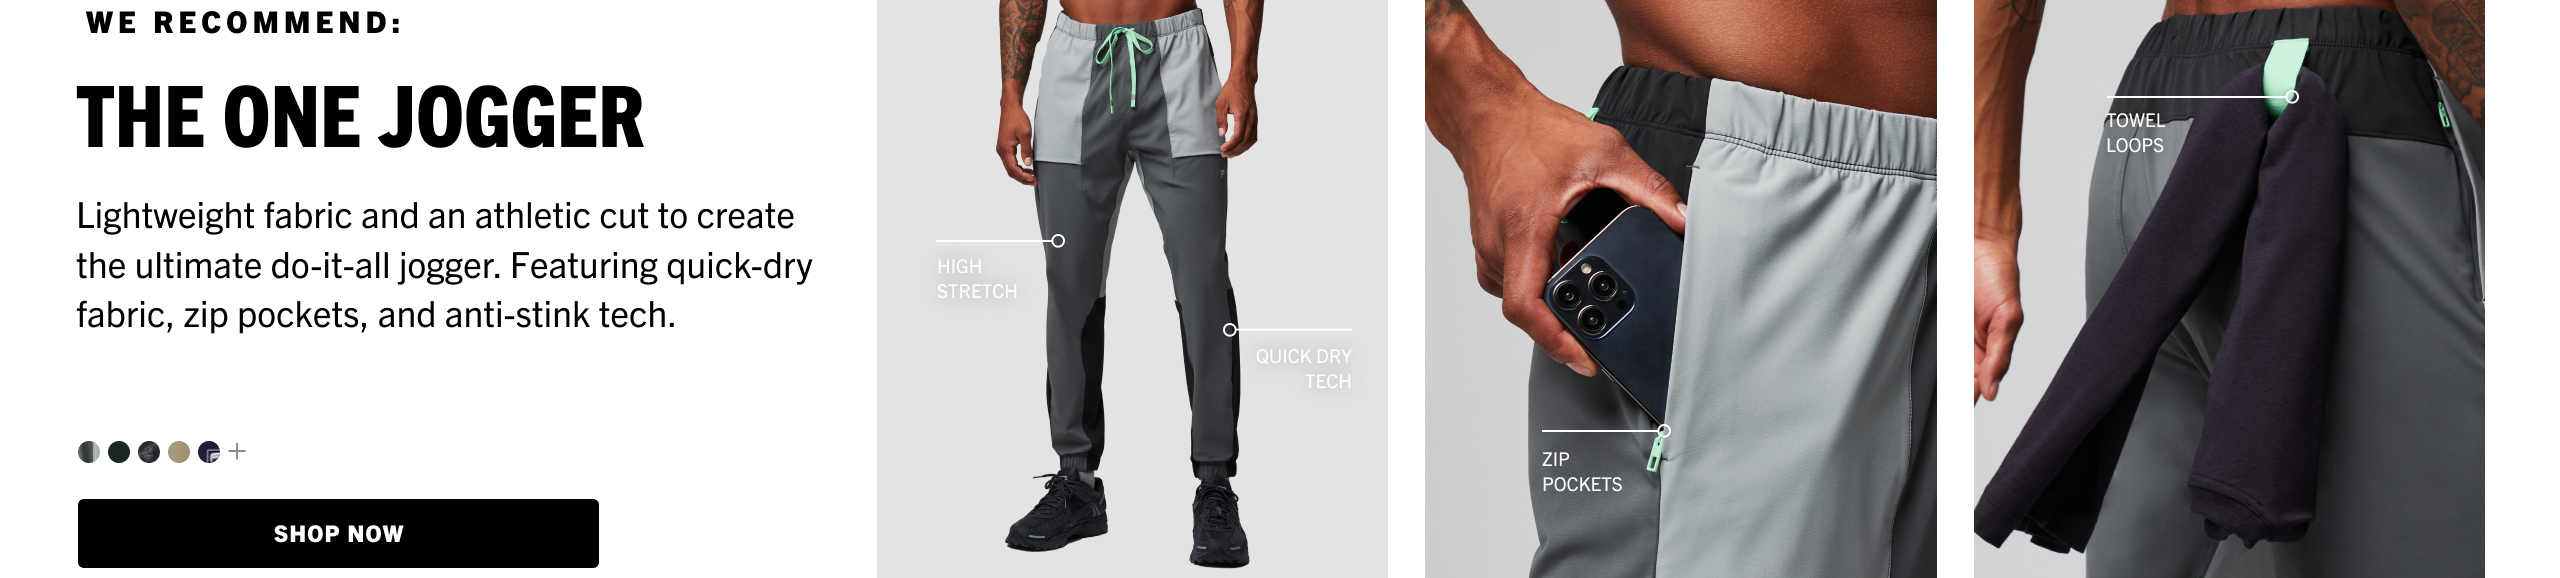 Find your perfect pant, whether you're looking to workout and lounge, office to golf, versatile, and more.